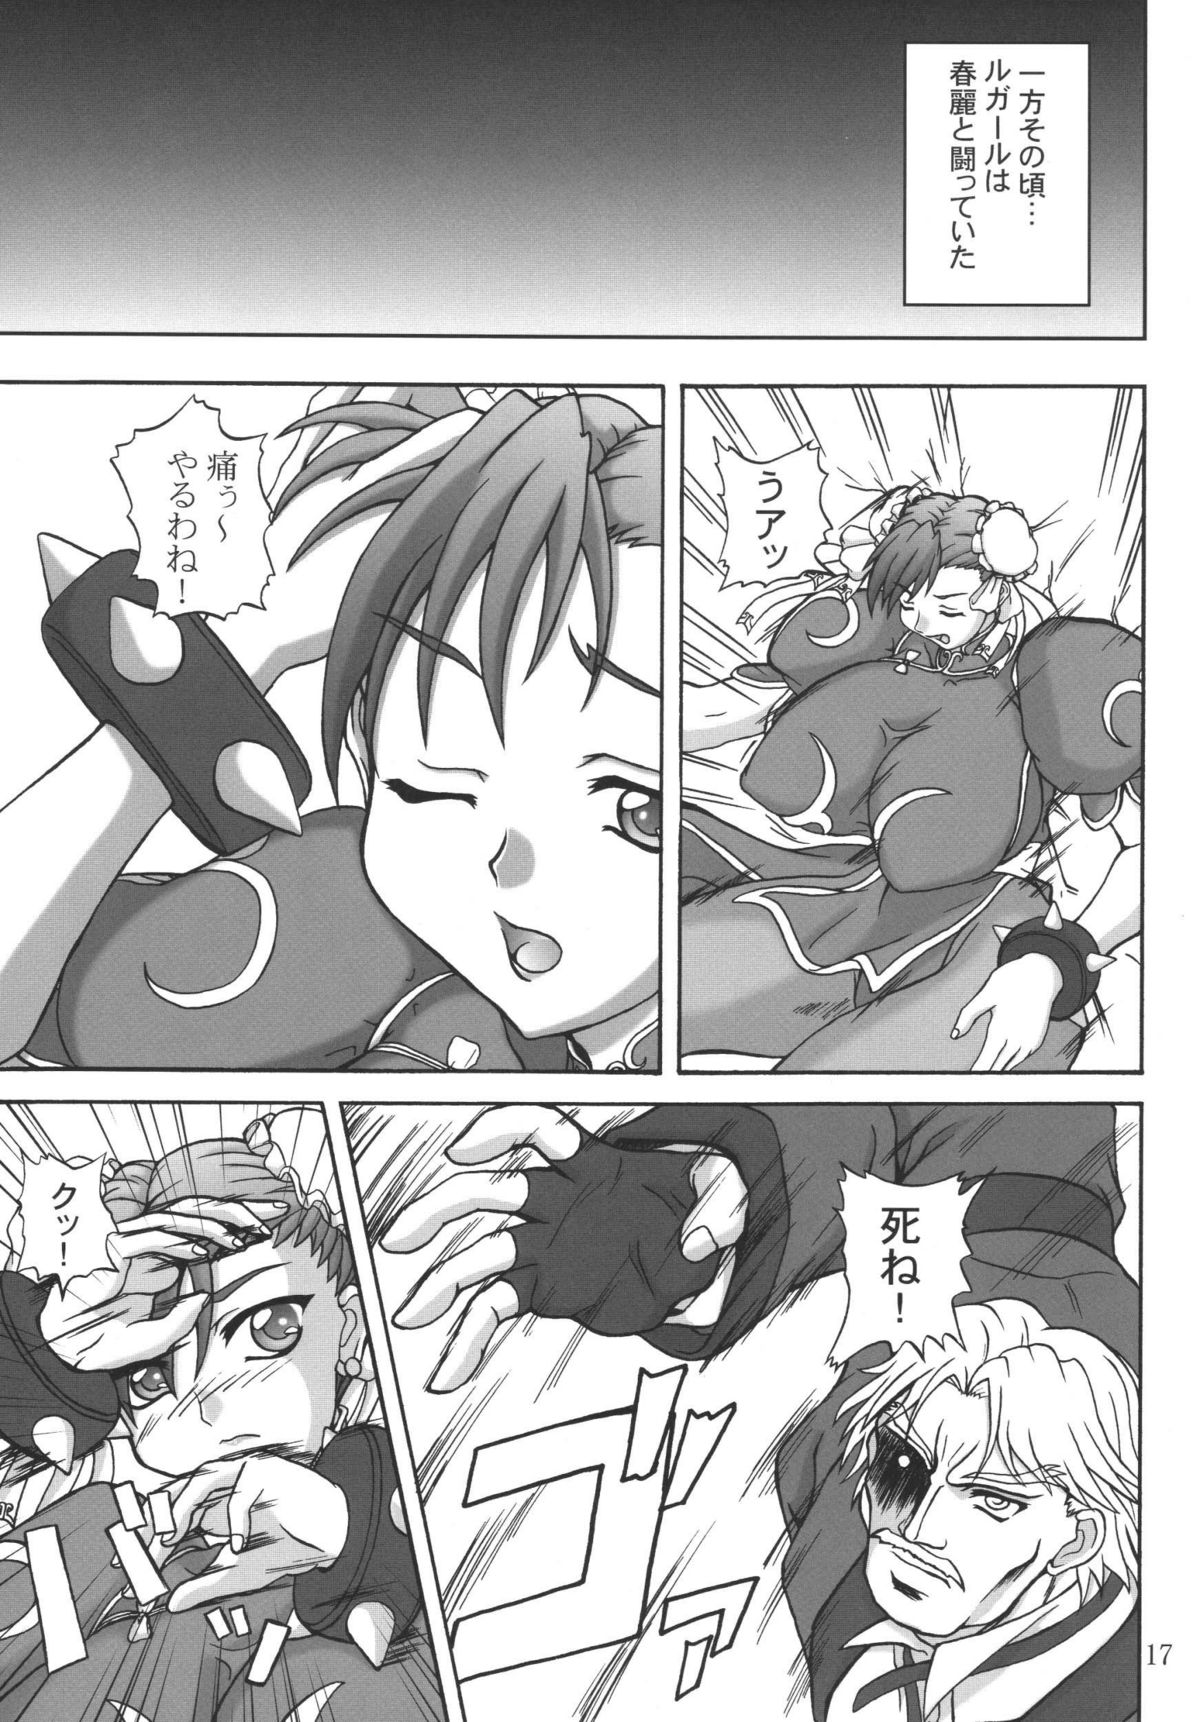 (C63) [Anglachel (Yamamura Natsuru)] Insanity (King of Fighters, Street Fighter) [2nd Edition 2004-12] page 16 full